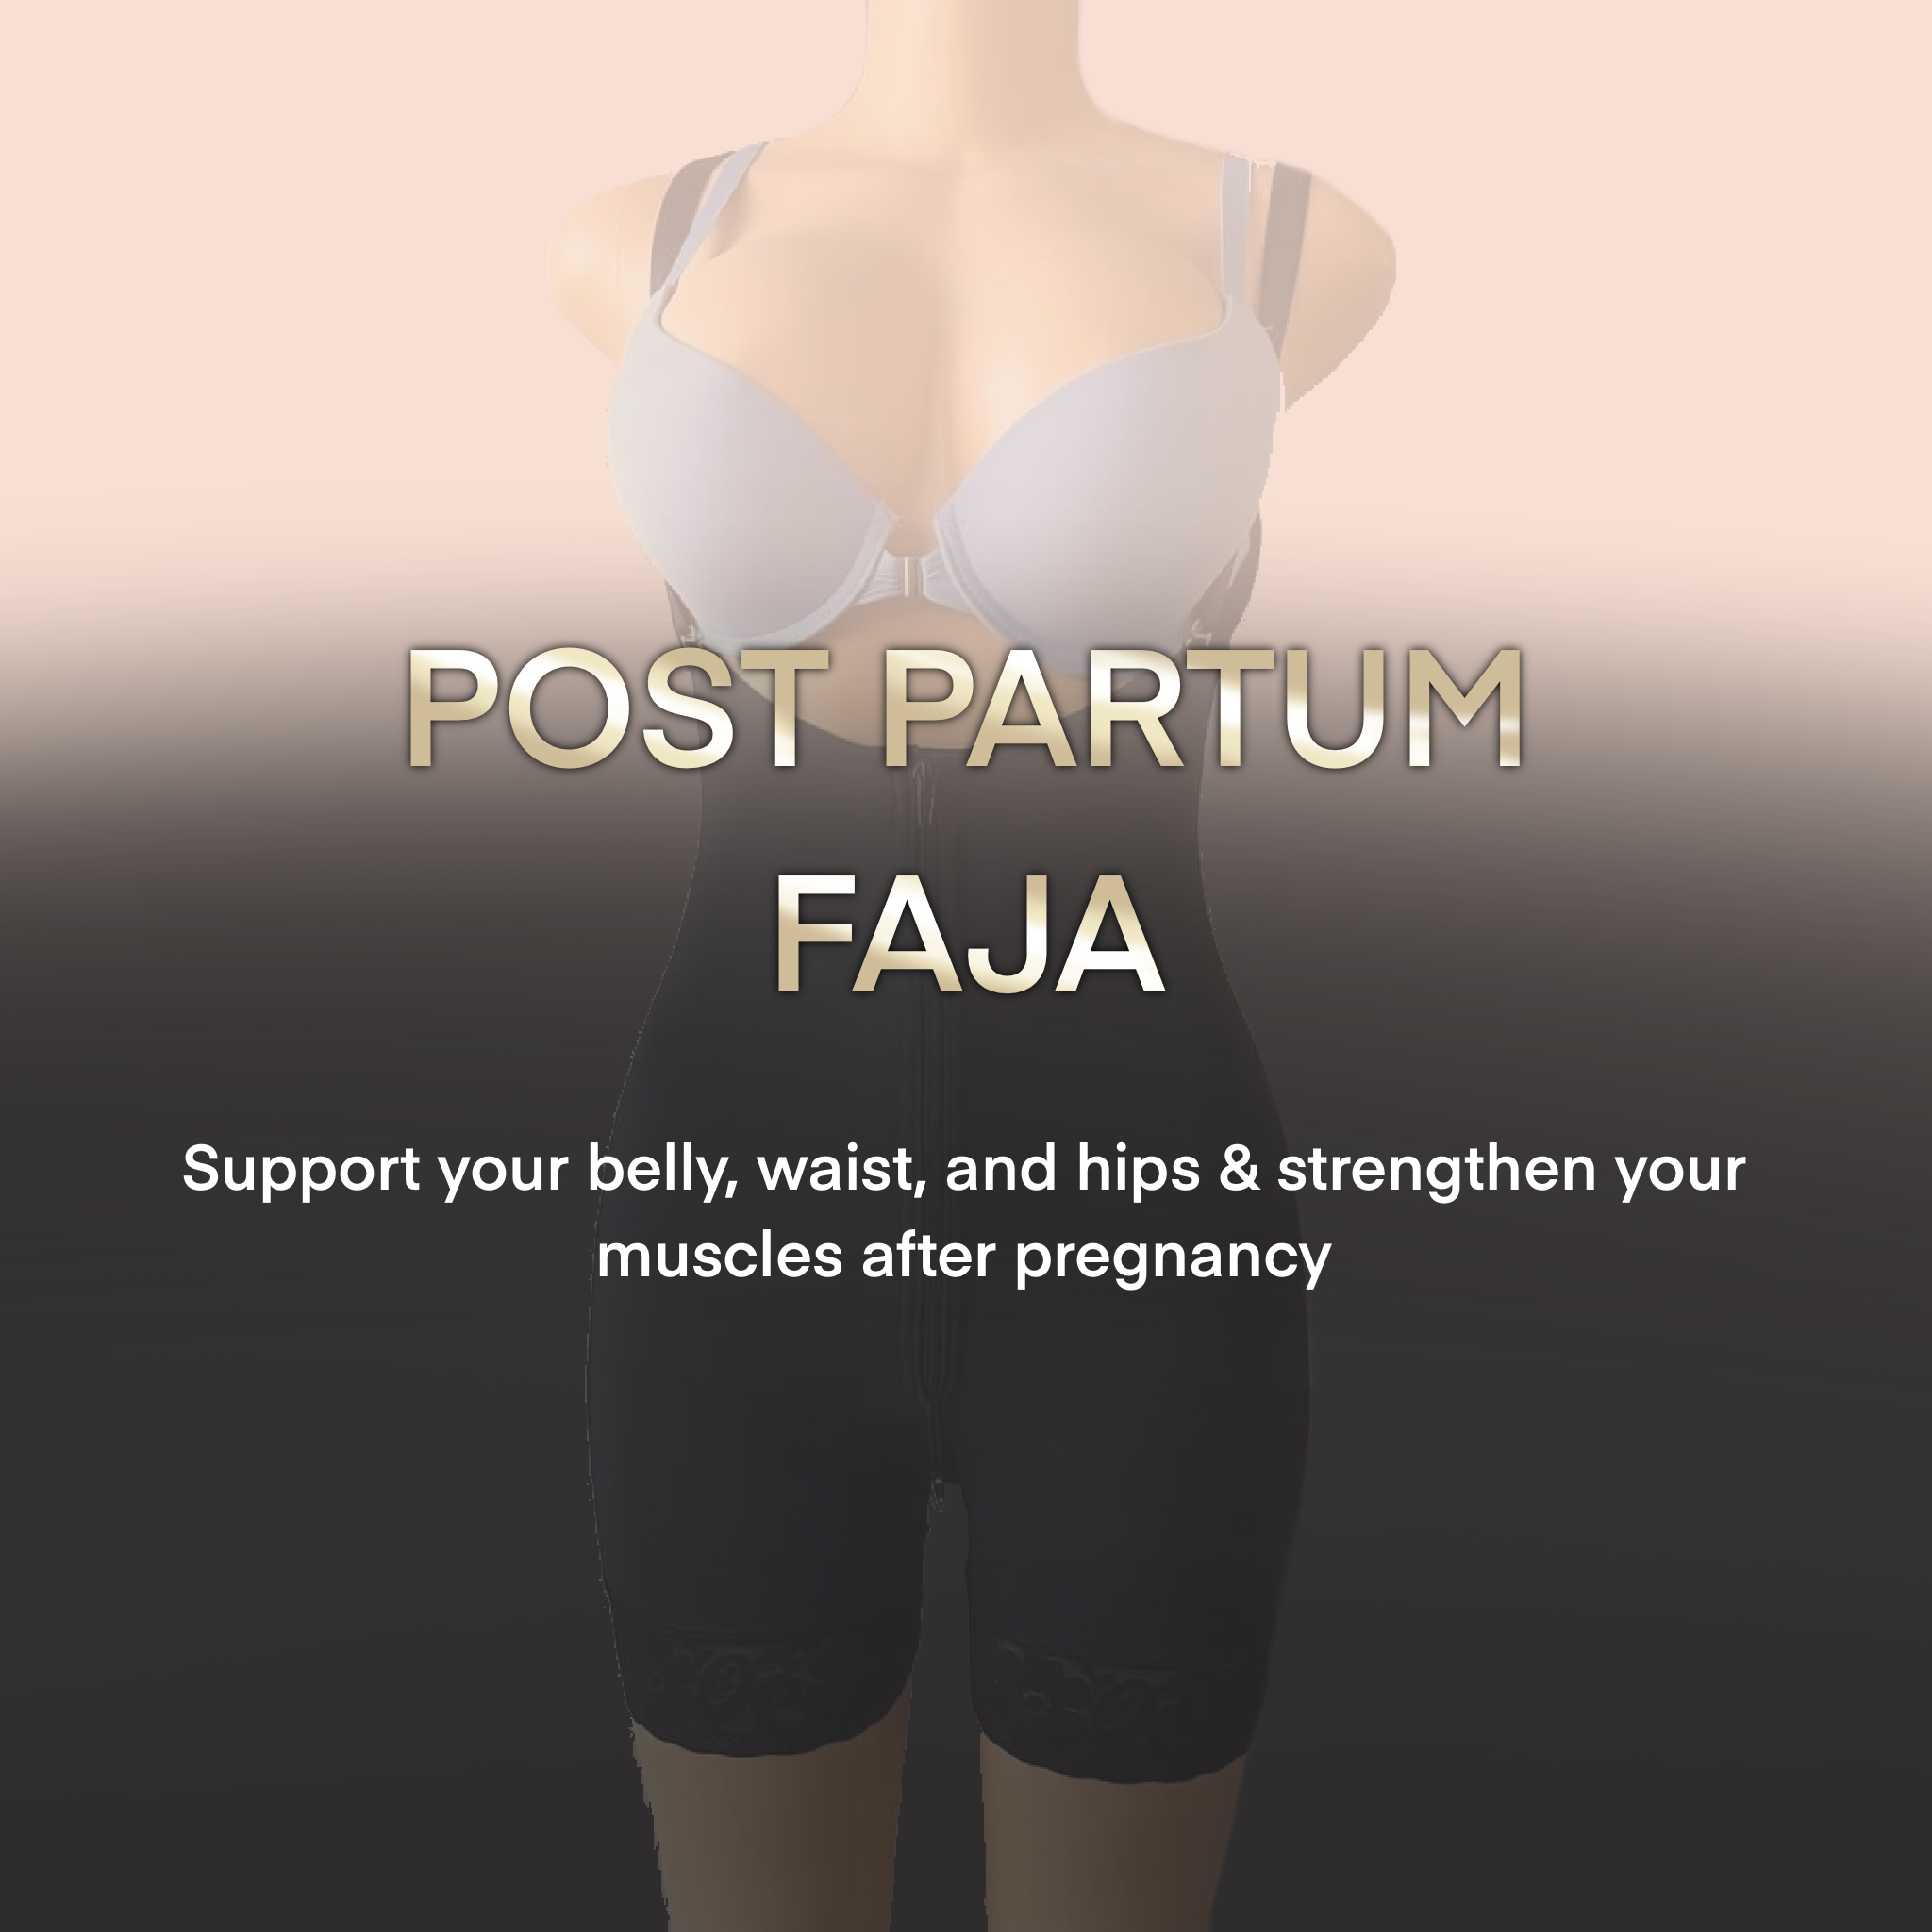 Recommended Post-Partum – Fajas Gisell